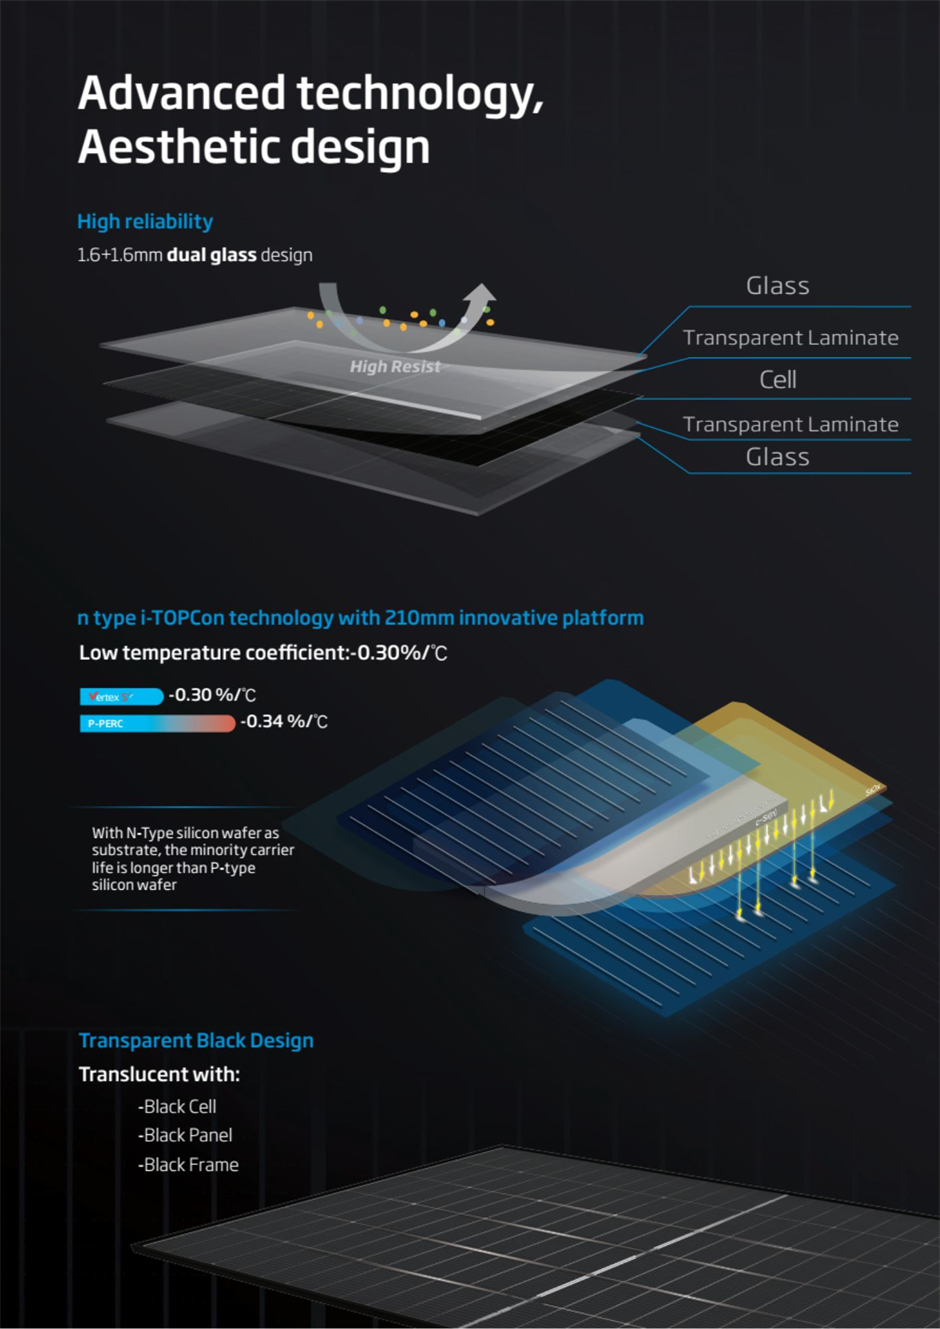 Incorporating advanced technology with an aesthetic design, Vertex S+ Clear Black solar module comes with high reliability, n-type i-TOPCon technology and 210mm innovative platform, and a transparent black design.